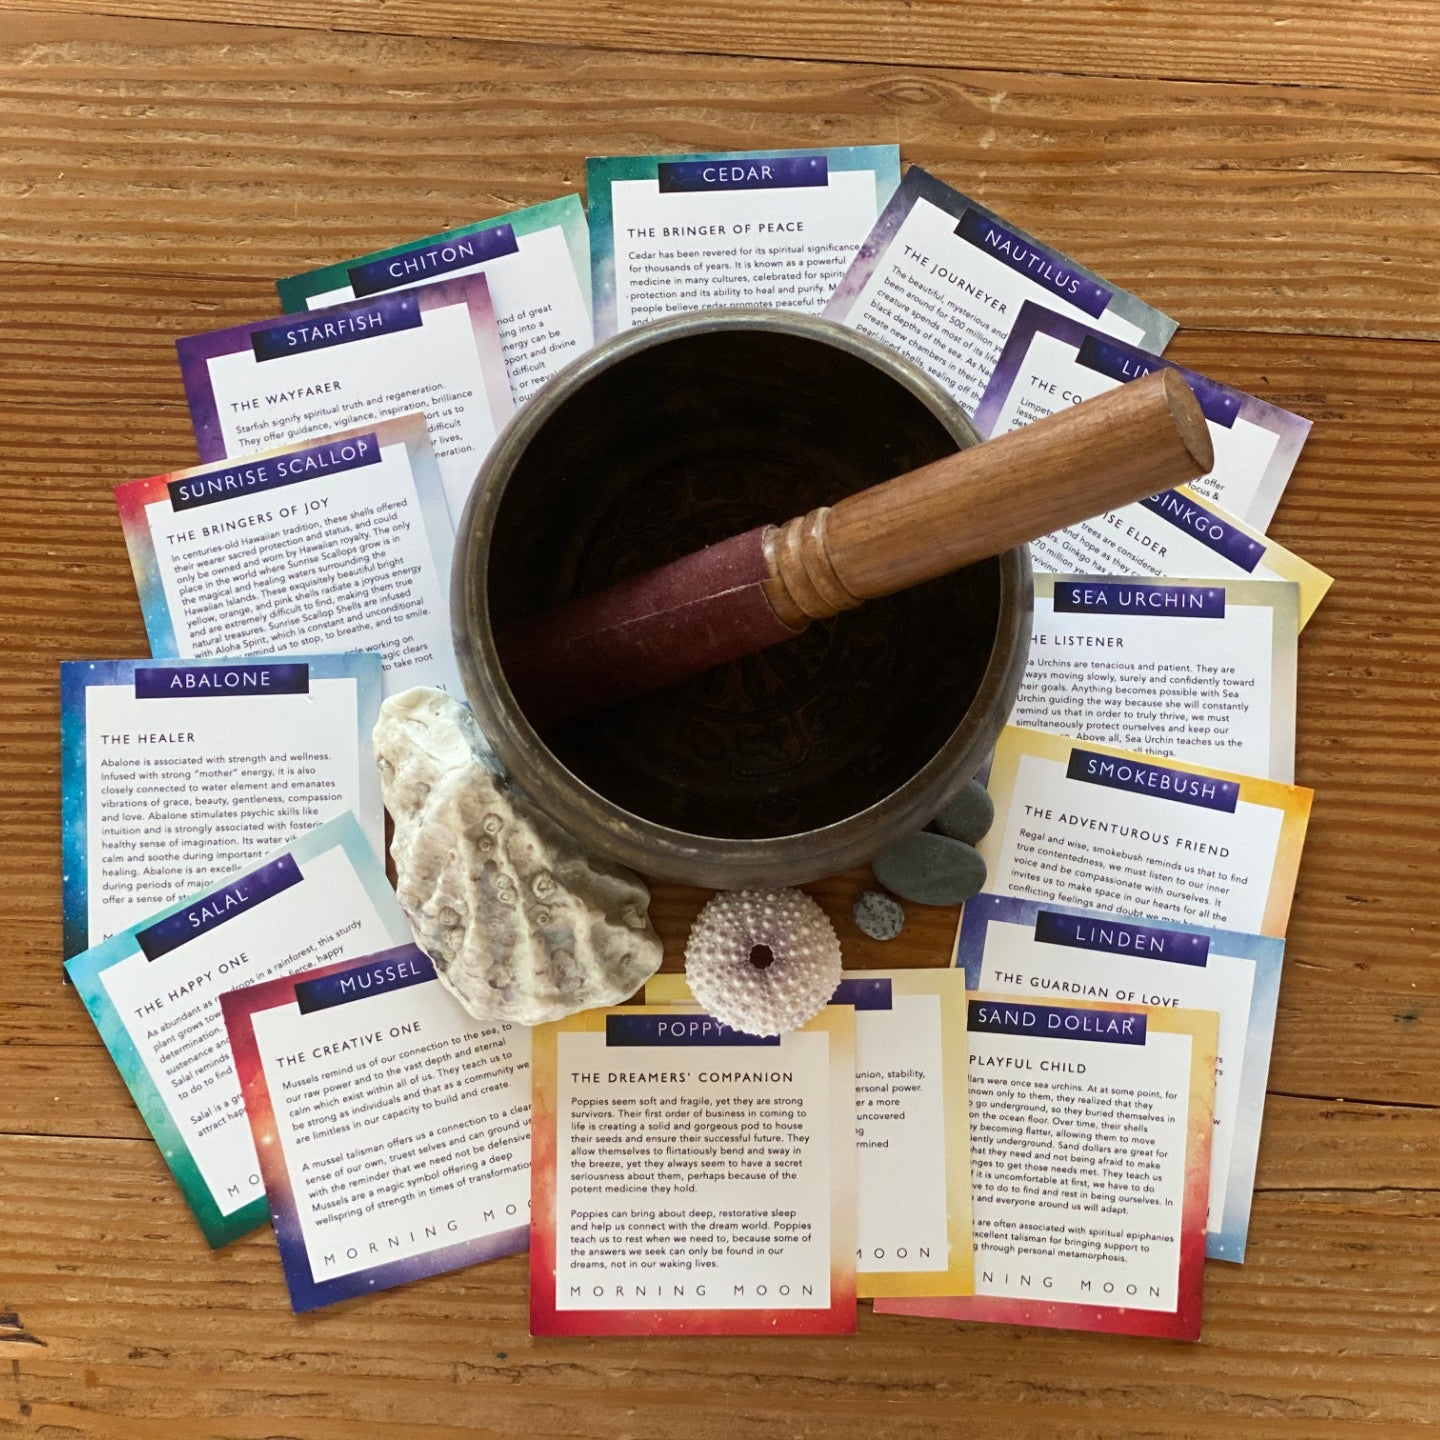 Warm feeling photo of Morning Moon's Elemental Inspiration Deck. Richly colourful cards spread out in a circle around oyster and sea urchin seashells and singing bowl 